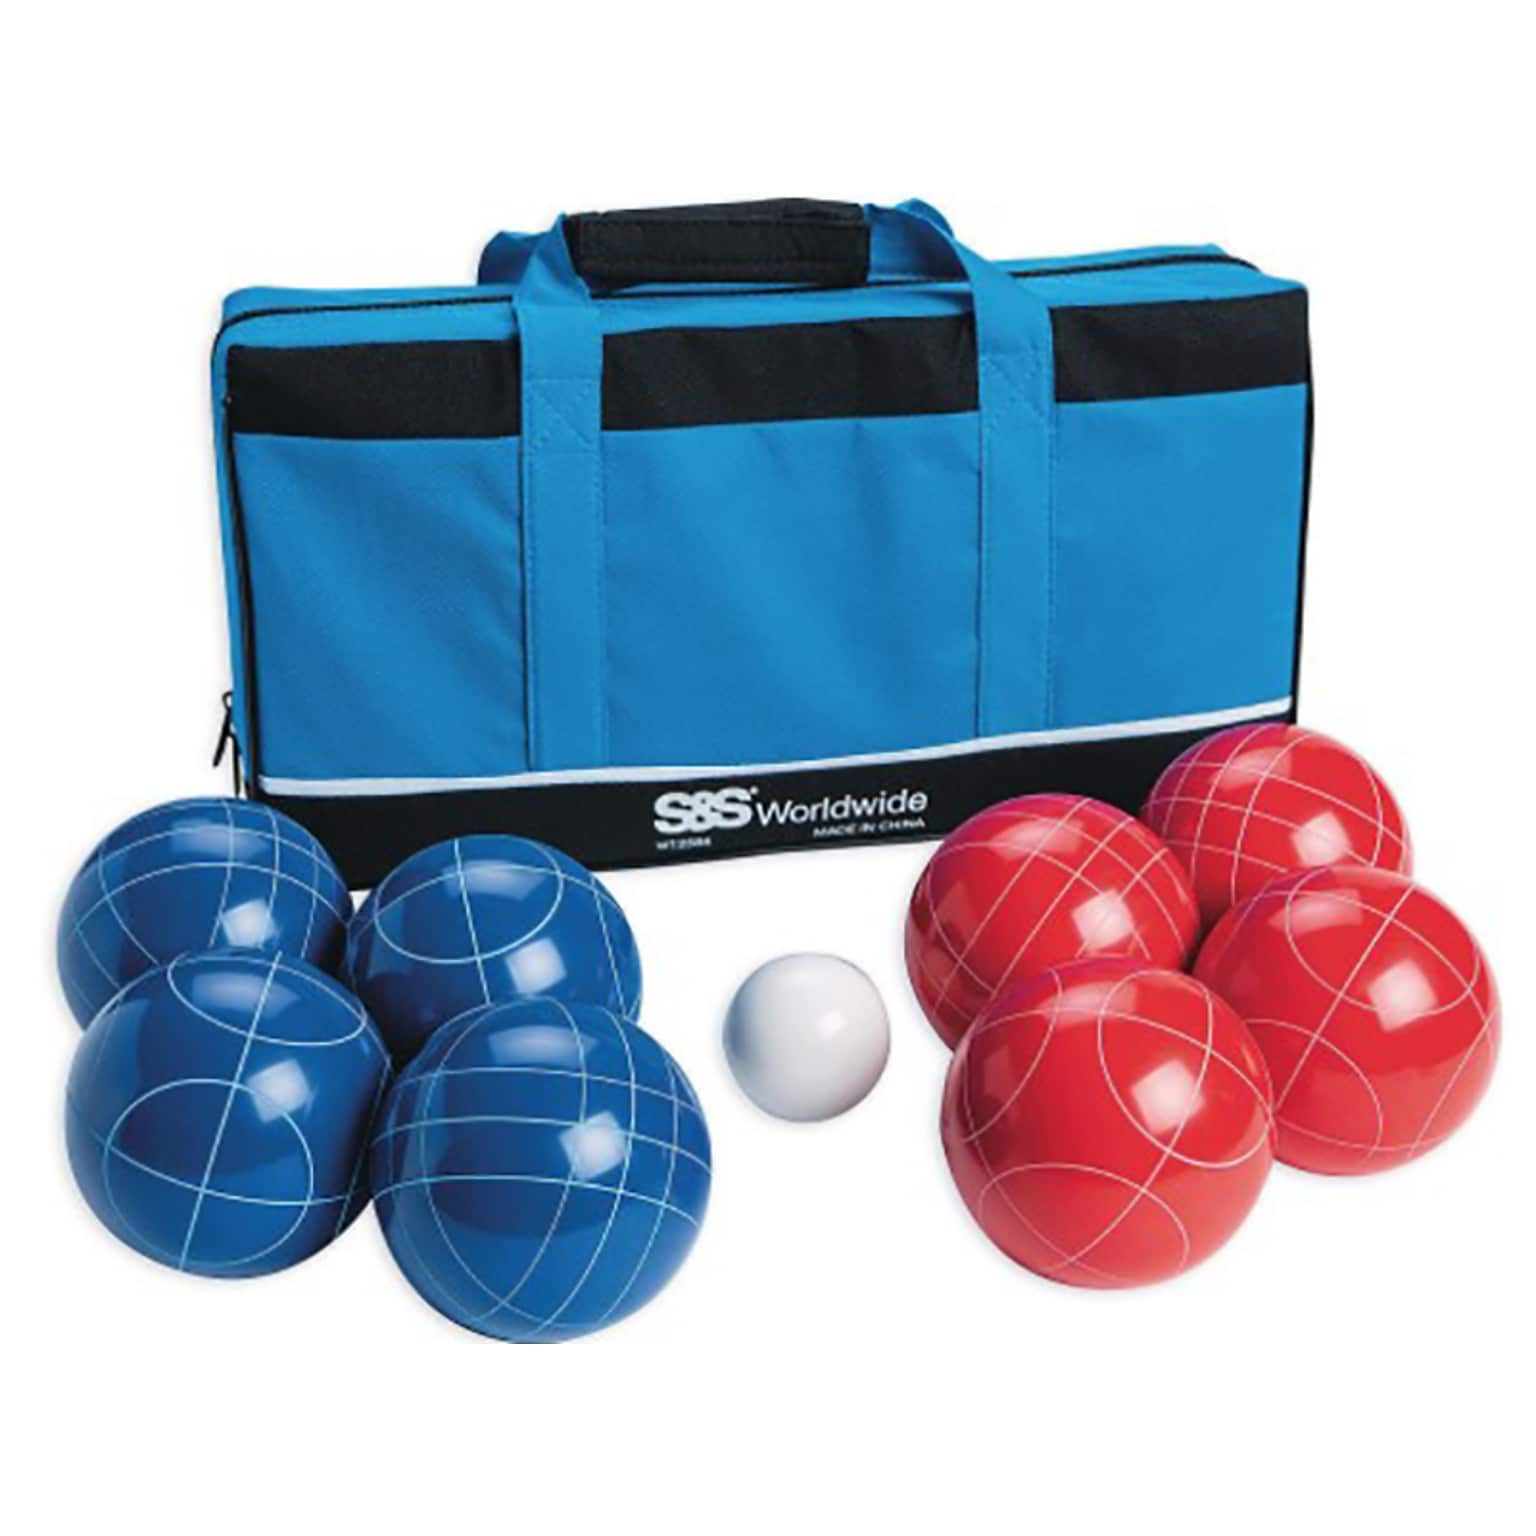 S&S Classic Bocce Set, Blue/Red/White (W12812)